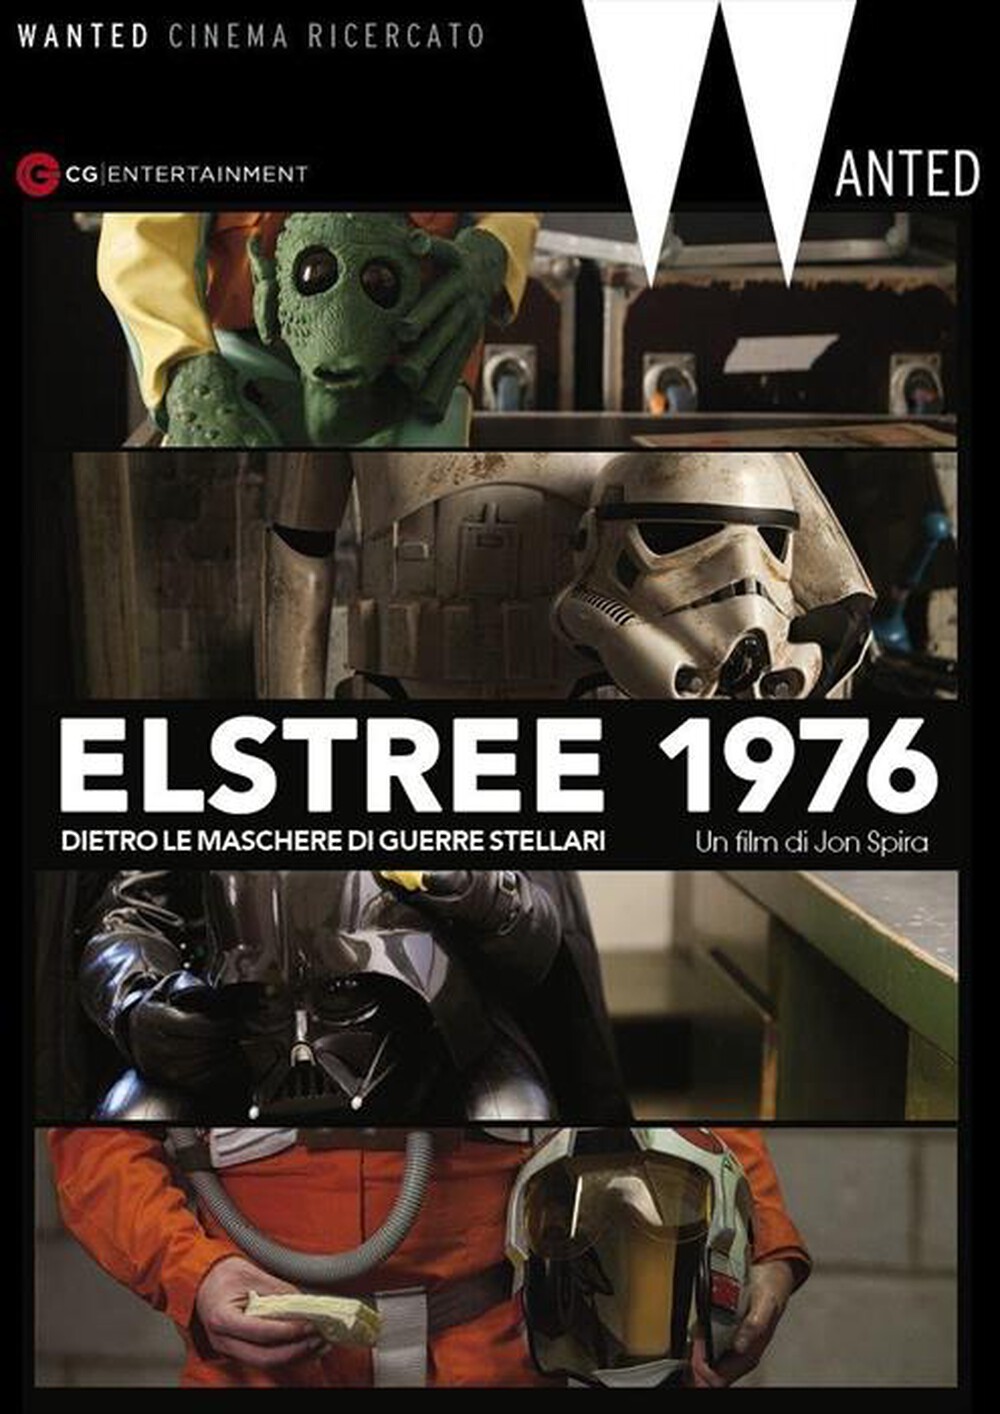 "Wanted - Elstree 1976"